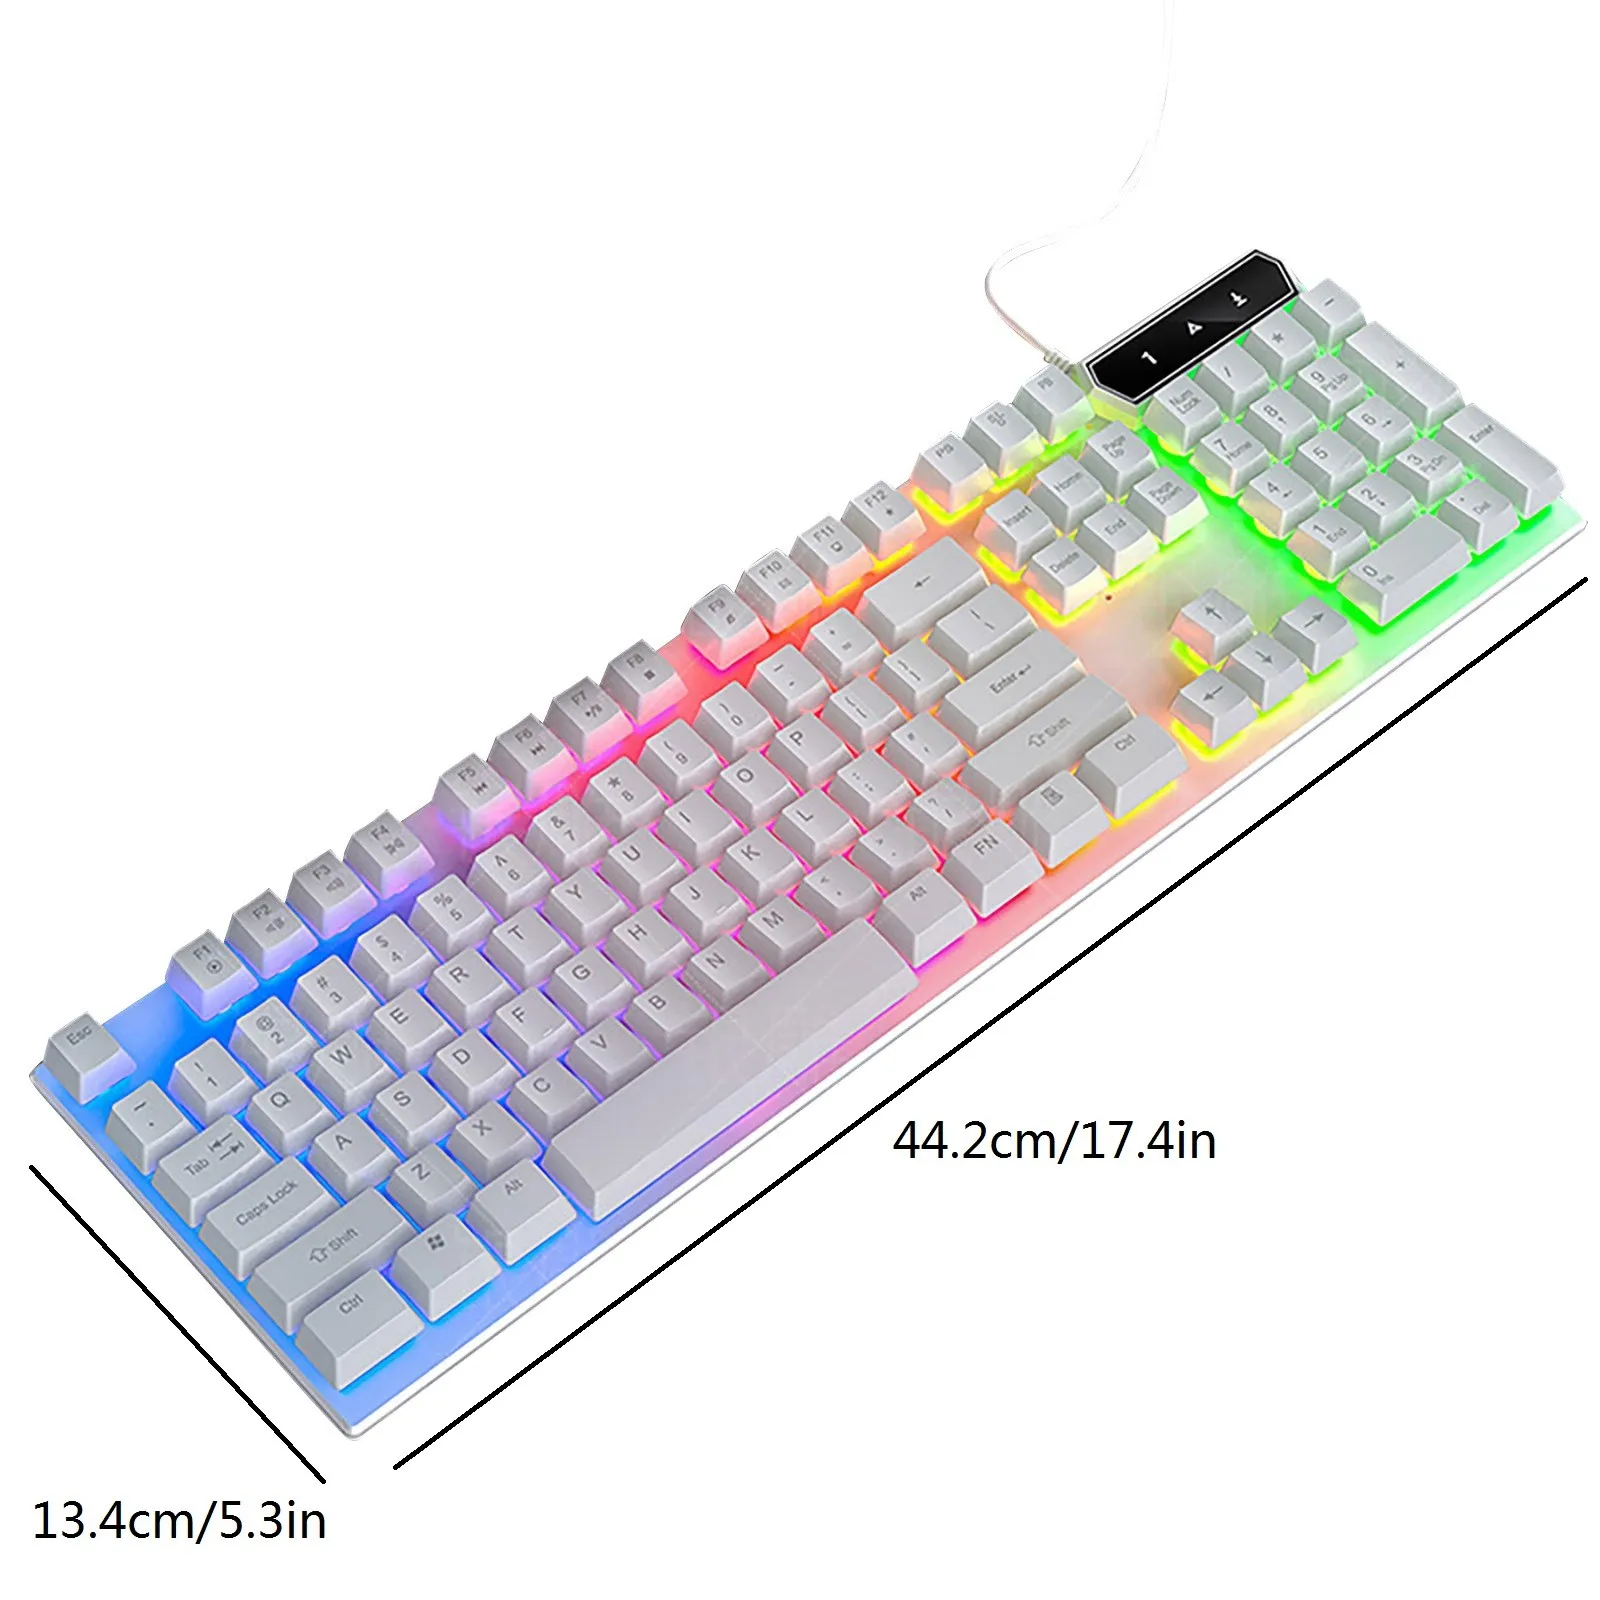 Wired Non Mechanical Keyboard PC Gamer Gaming Kit Black White Switch Keycaps Rainbow RGB Backlight Color Mixed Computer Keyboard